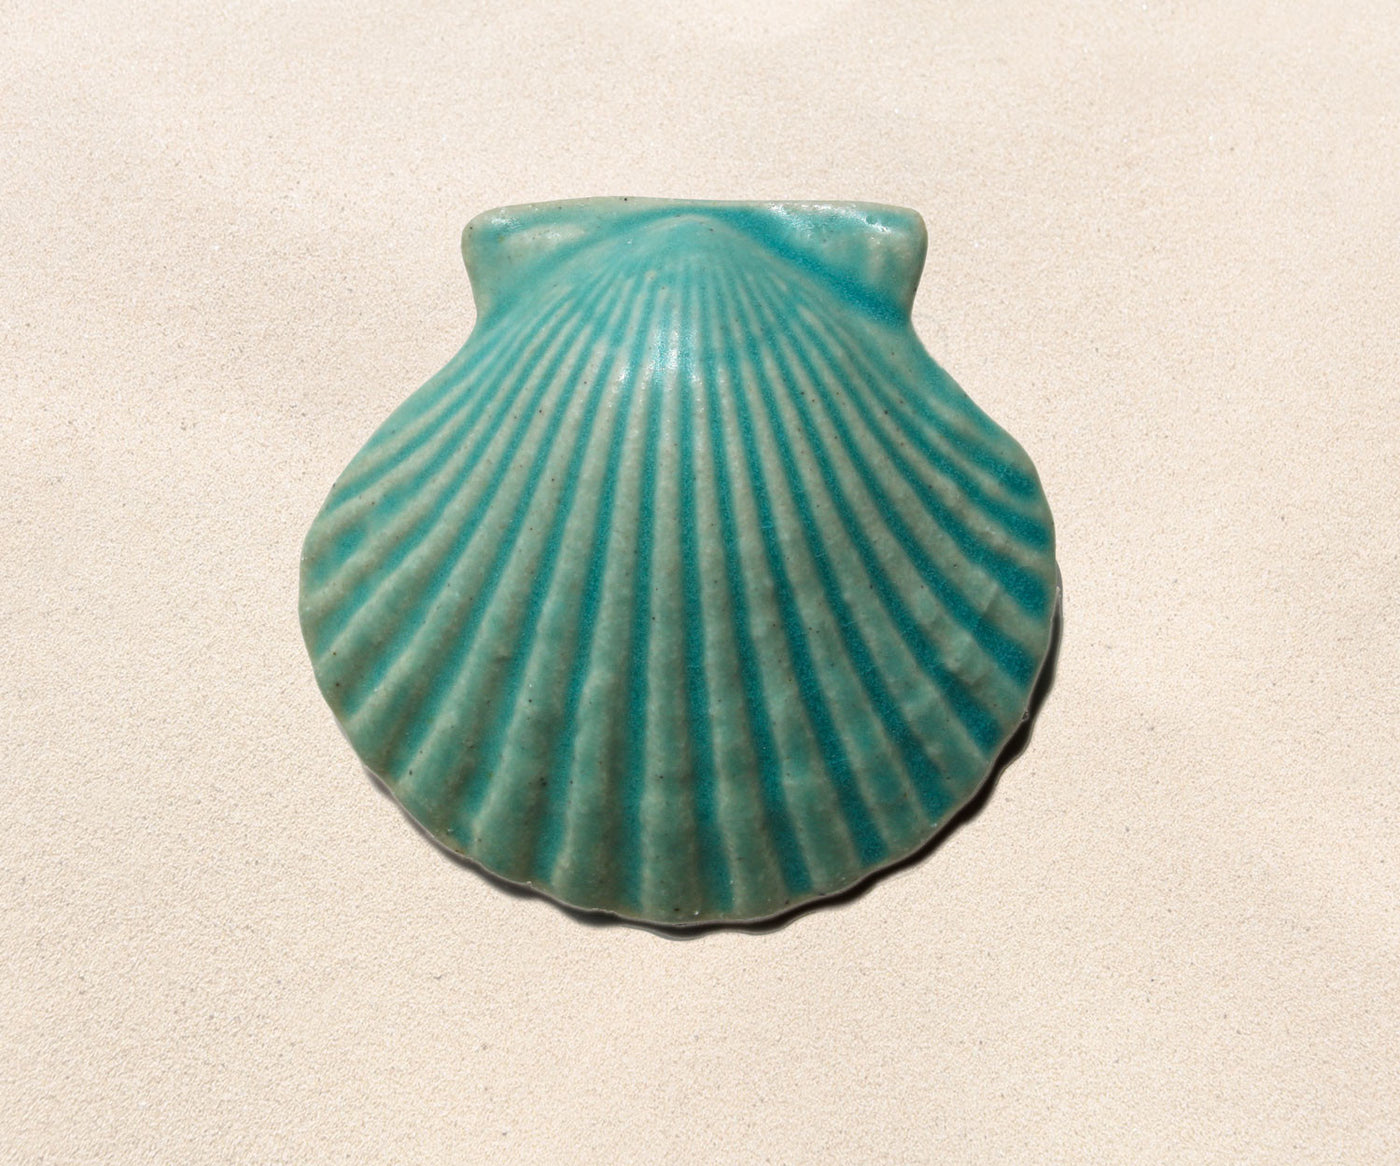 Shell Paperweights - Caribbean Blue